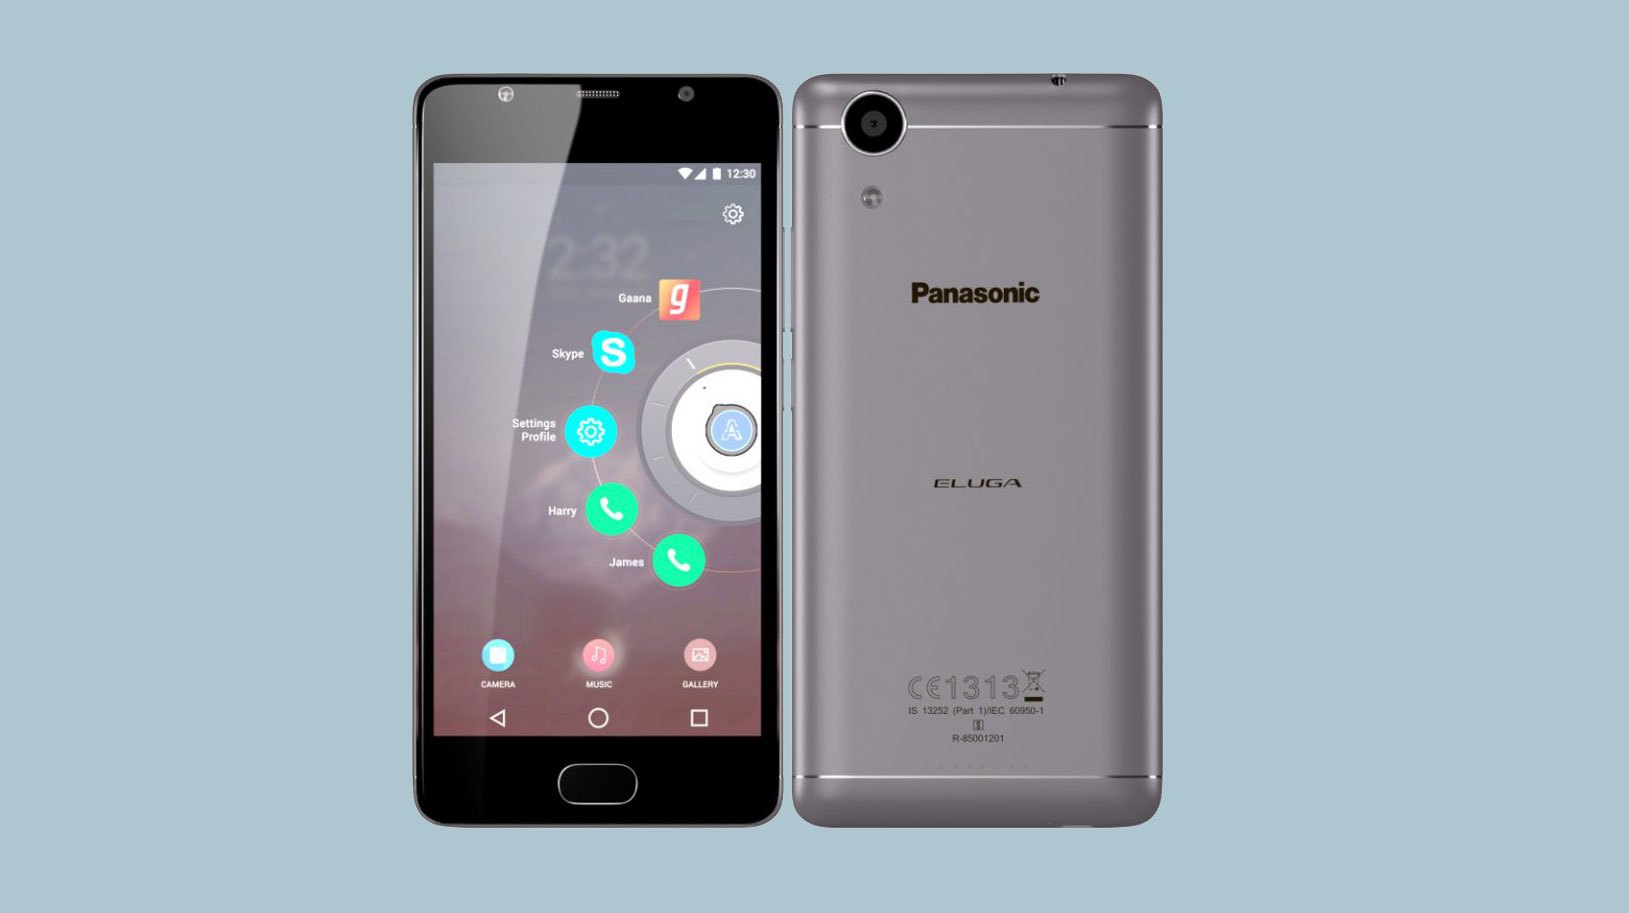 Root and Install TWRP Recovery on Panasonic P85, How to Root Panasonic P85, Install TWRP Recovery on Panasonic P85, Root Panasonic P85 Using supersu